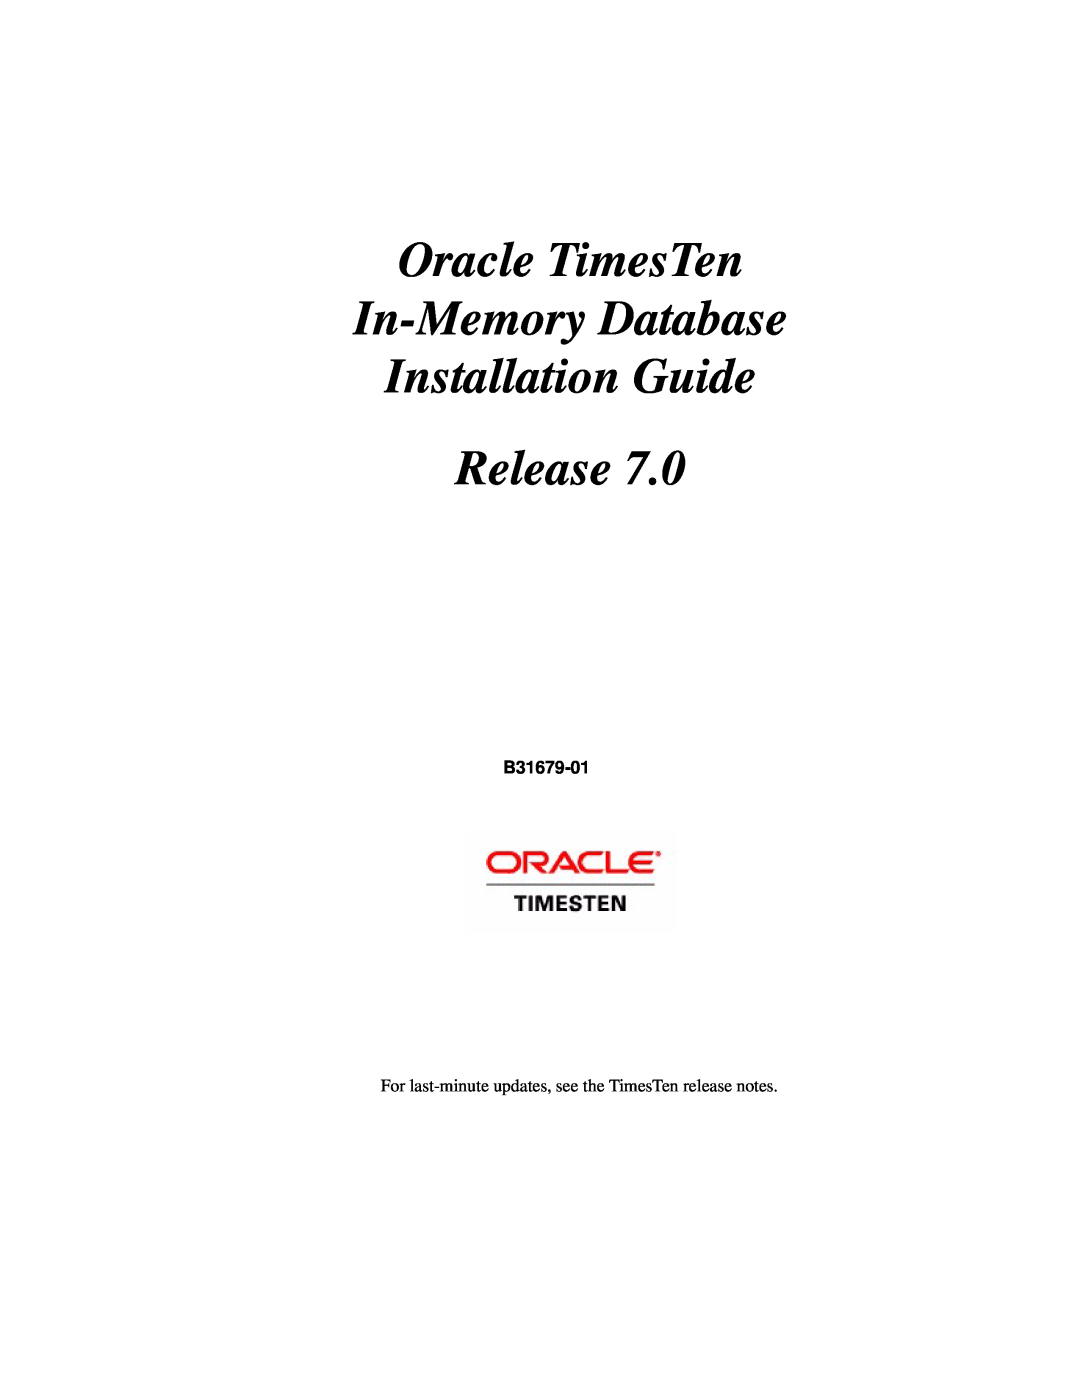 Oracle Audio Technologies B31679-01 manual Oracle TimesTen In-Memory Database Installation Guide Release 